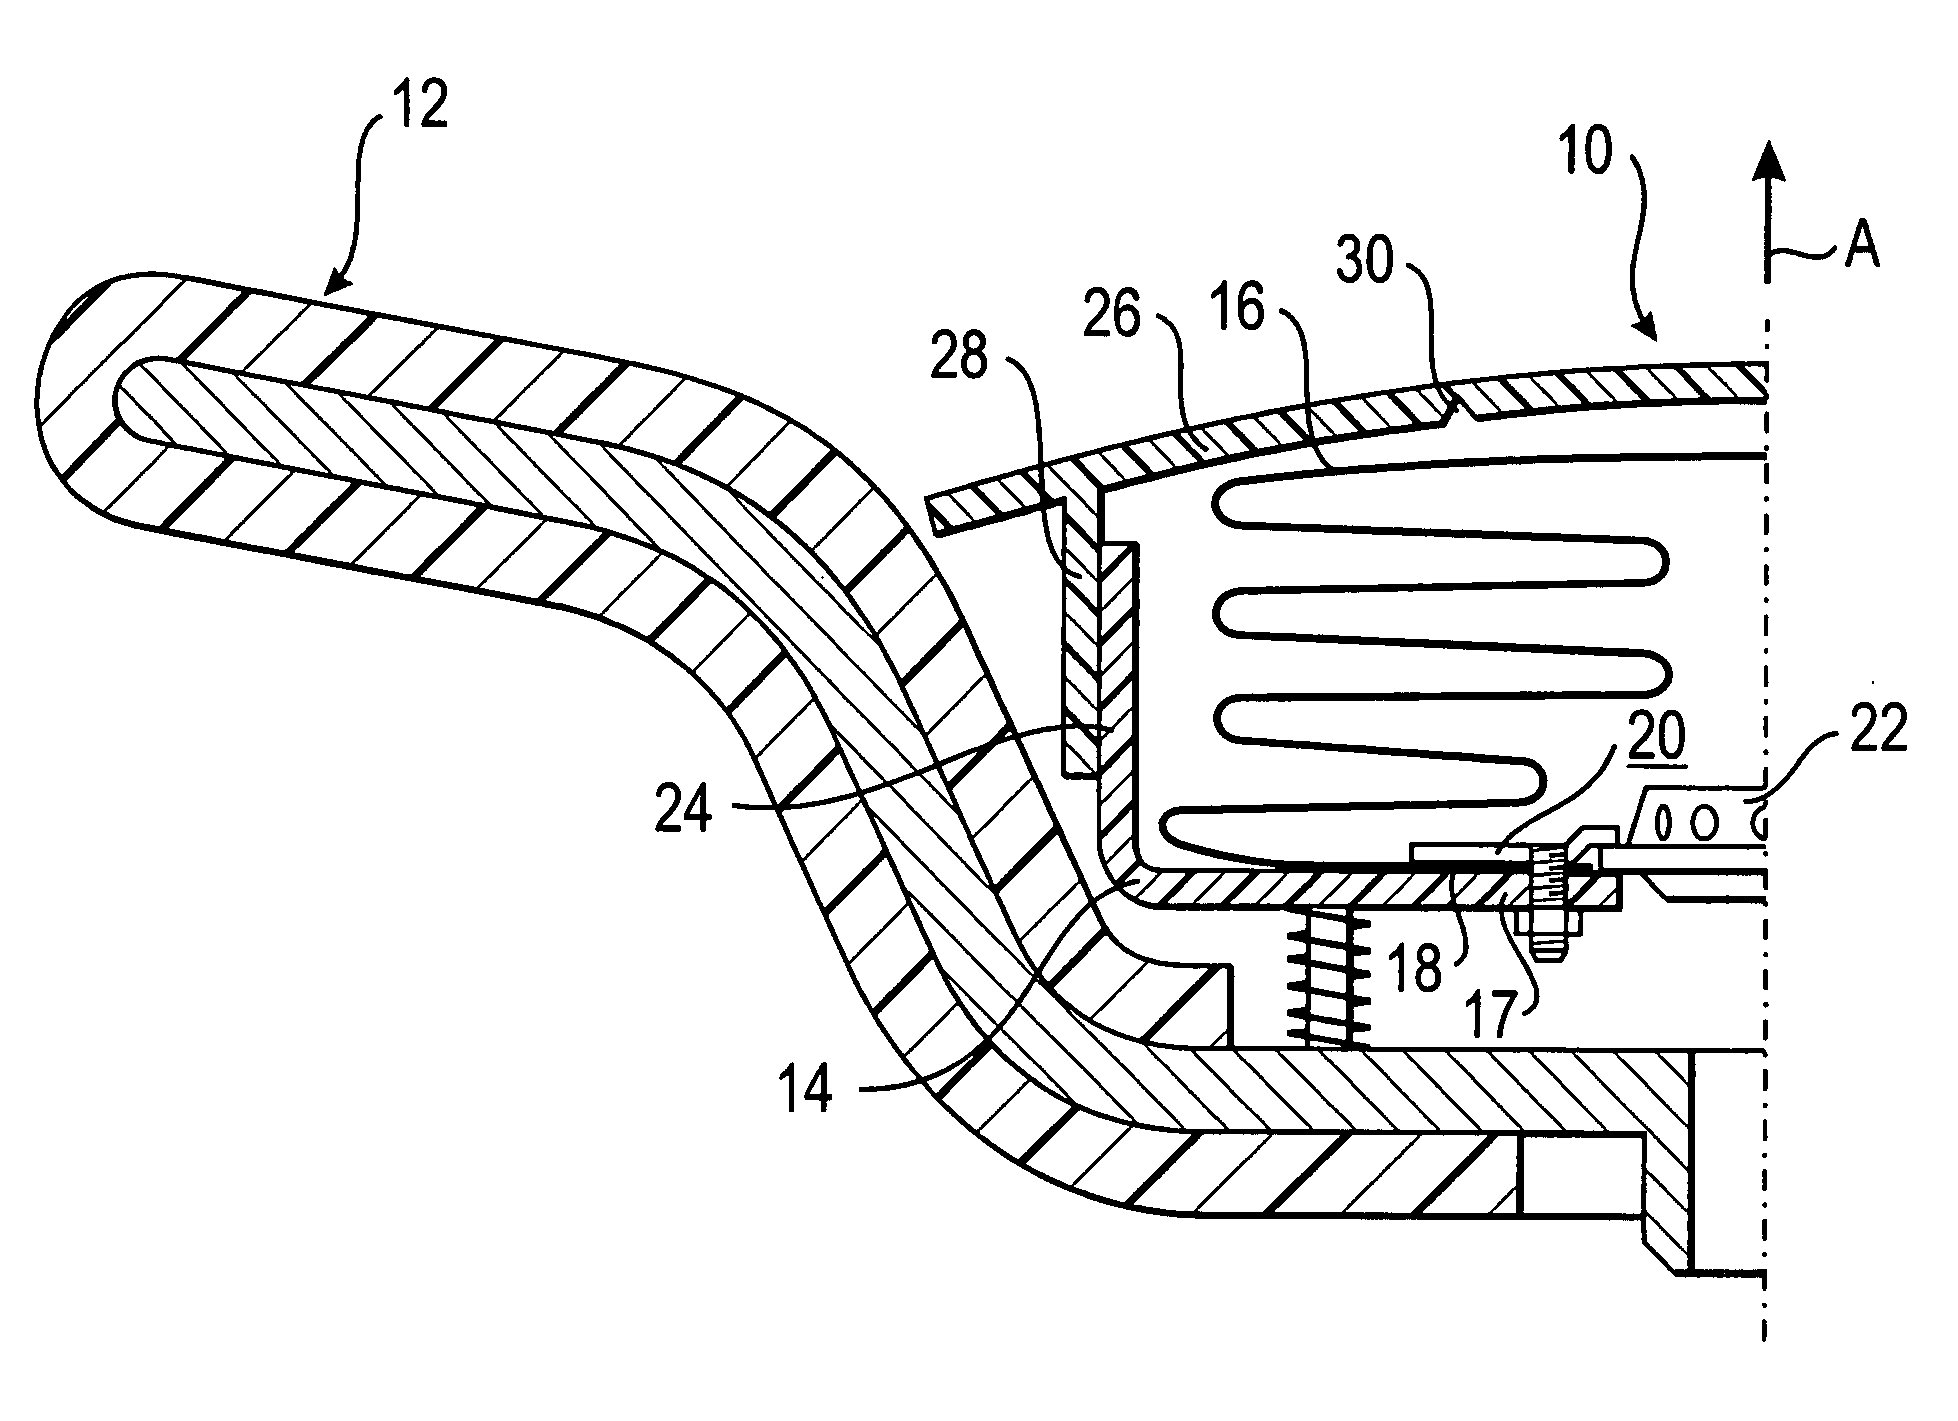 Gas bag module for a vehicle occupant restraint system